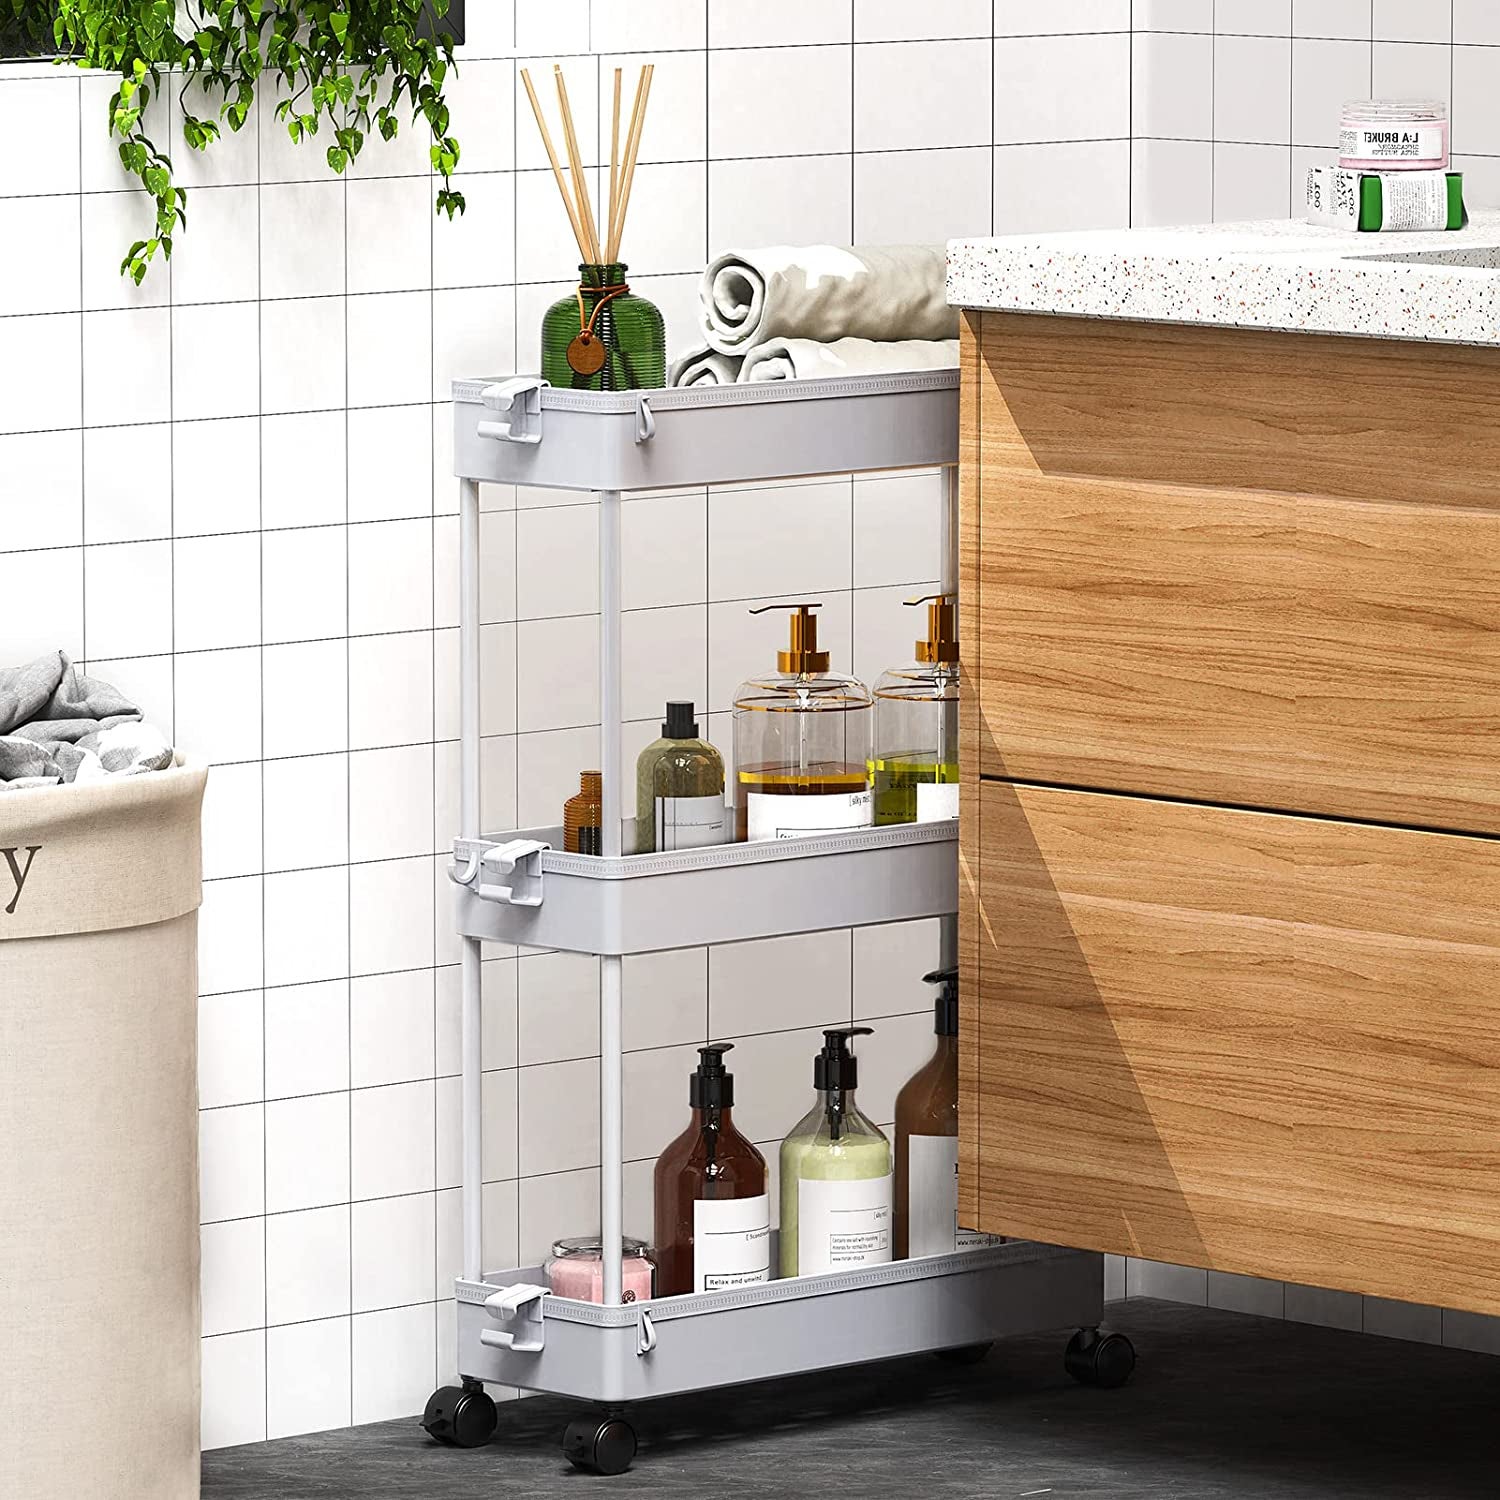 5 Ways to Organize Your Bathroom with Solid Grip…